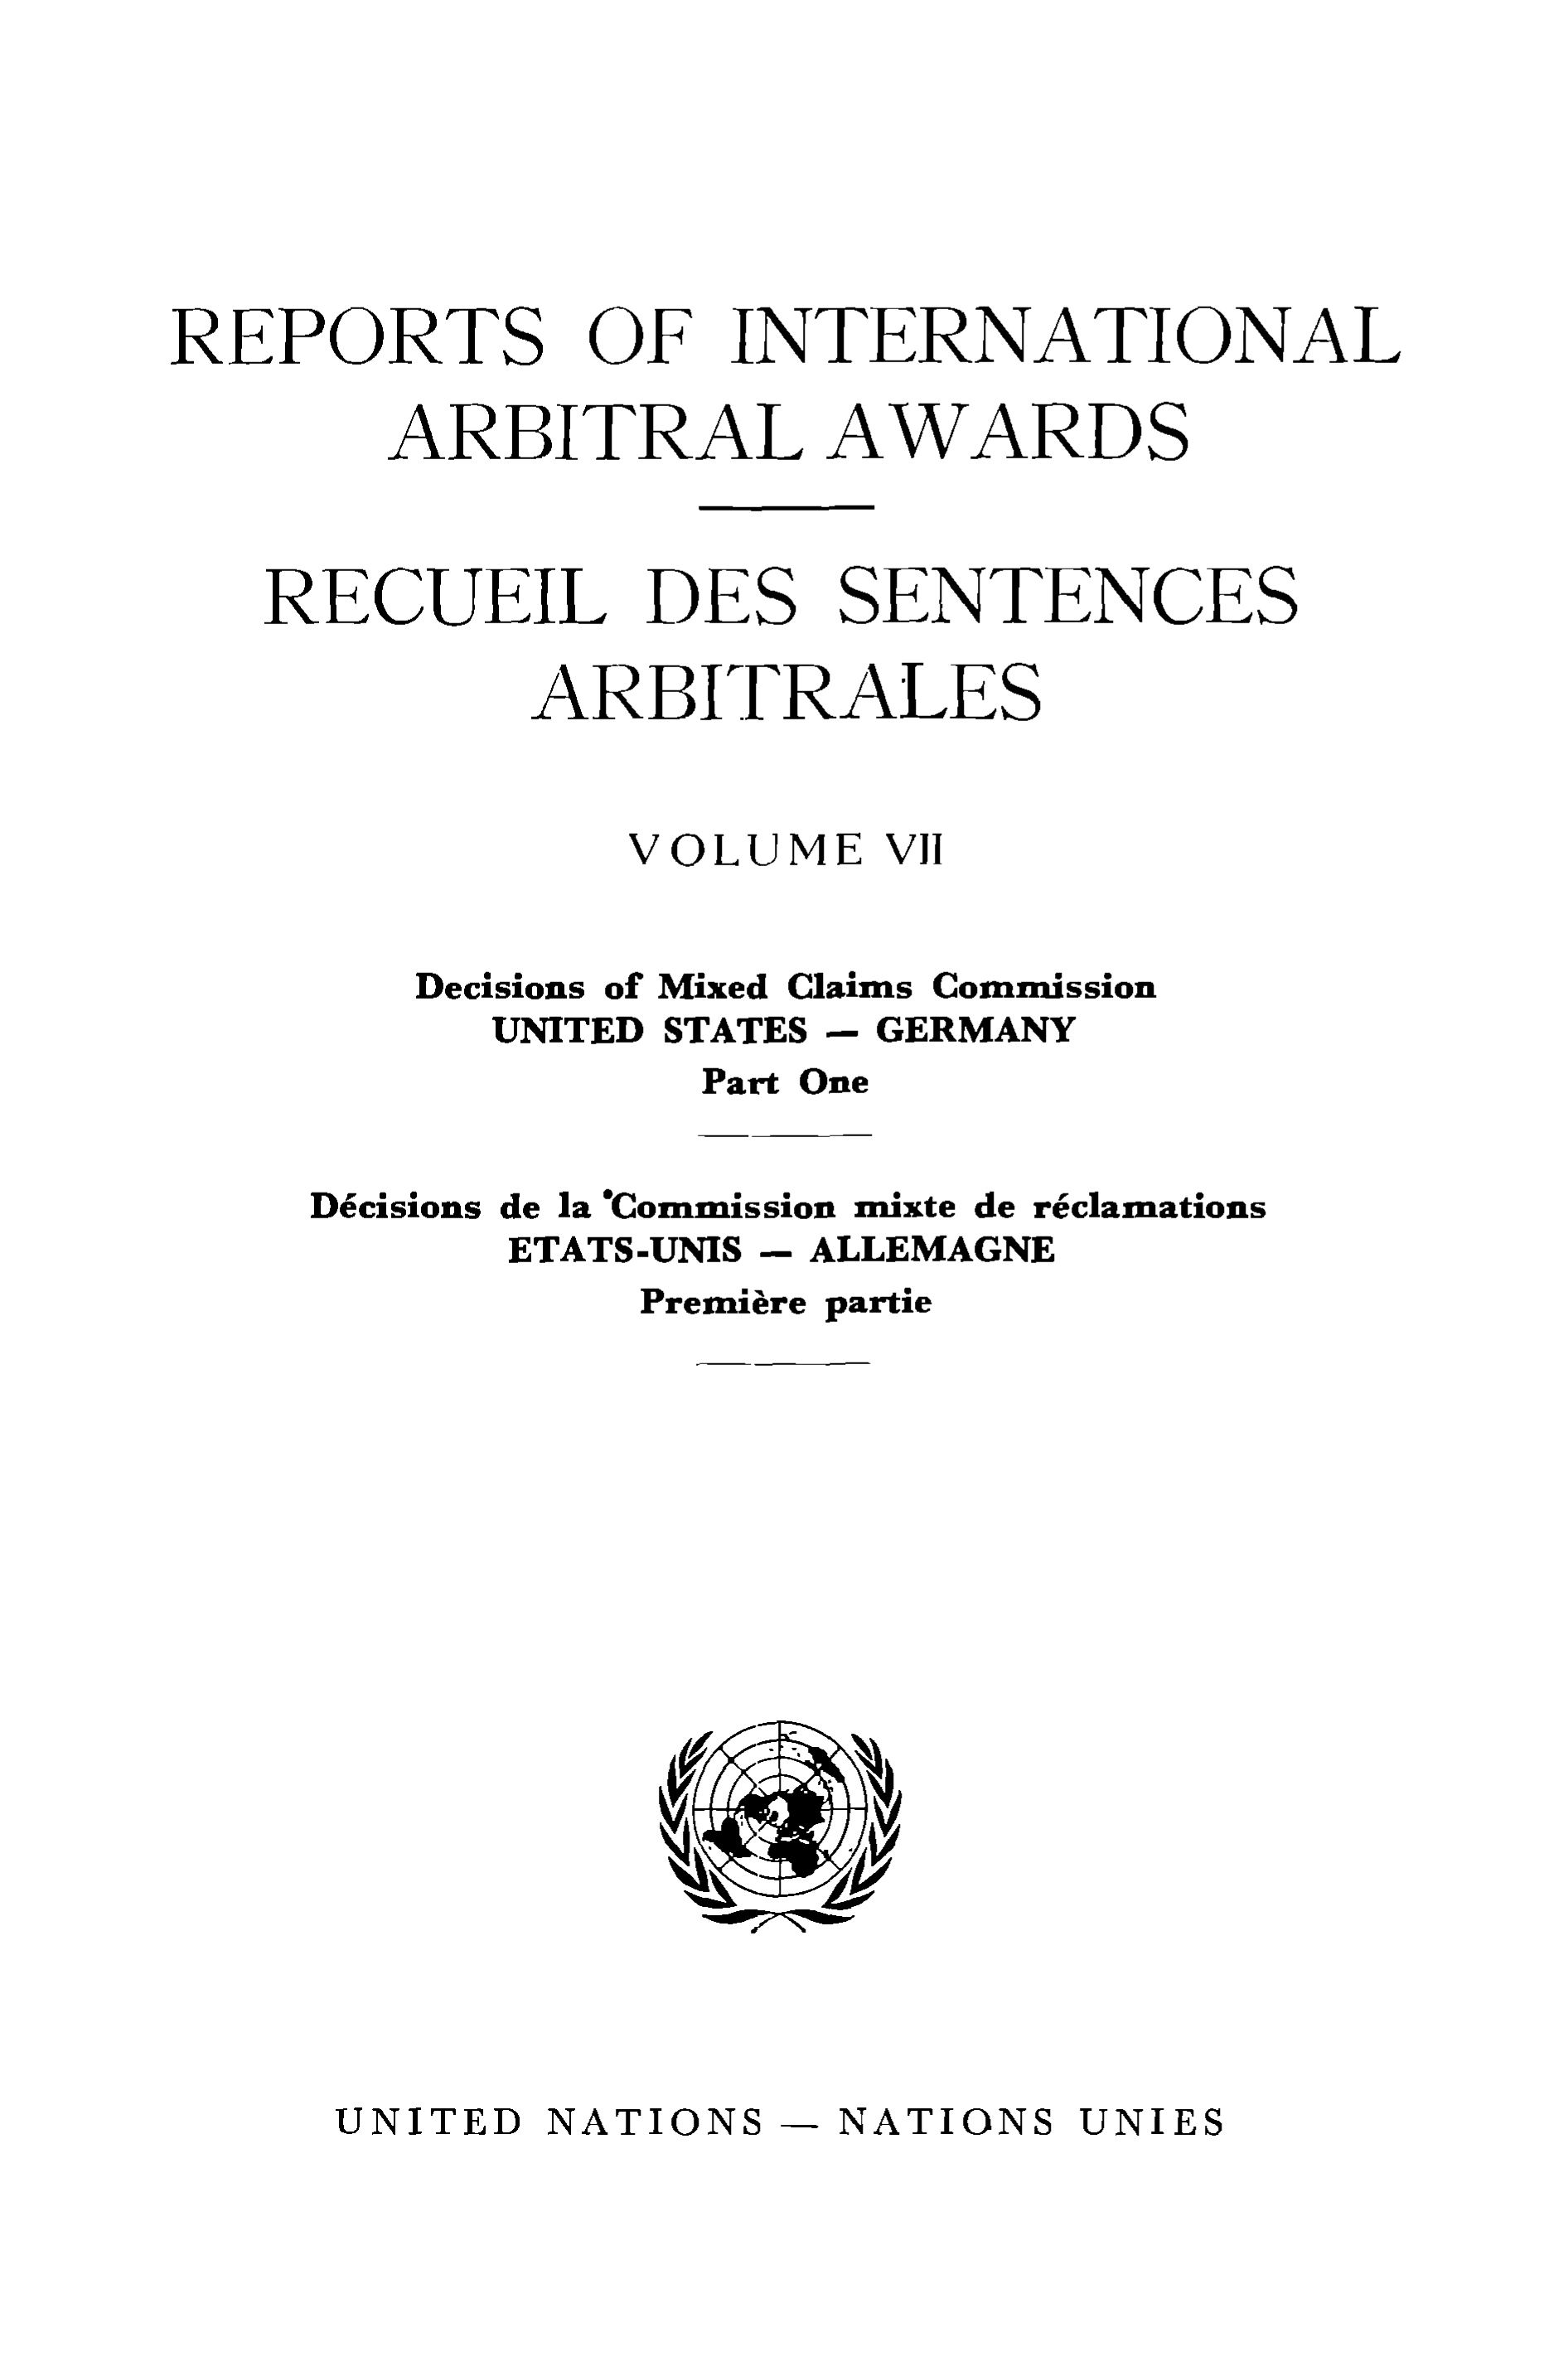 image of Reports of International Arbitral Awards, Vol. VII